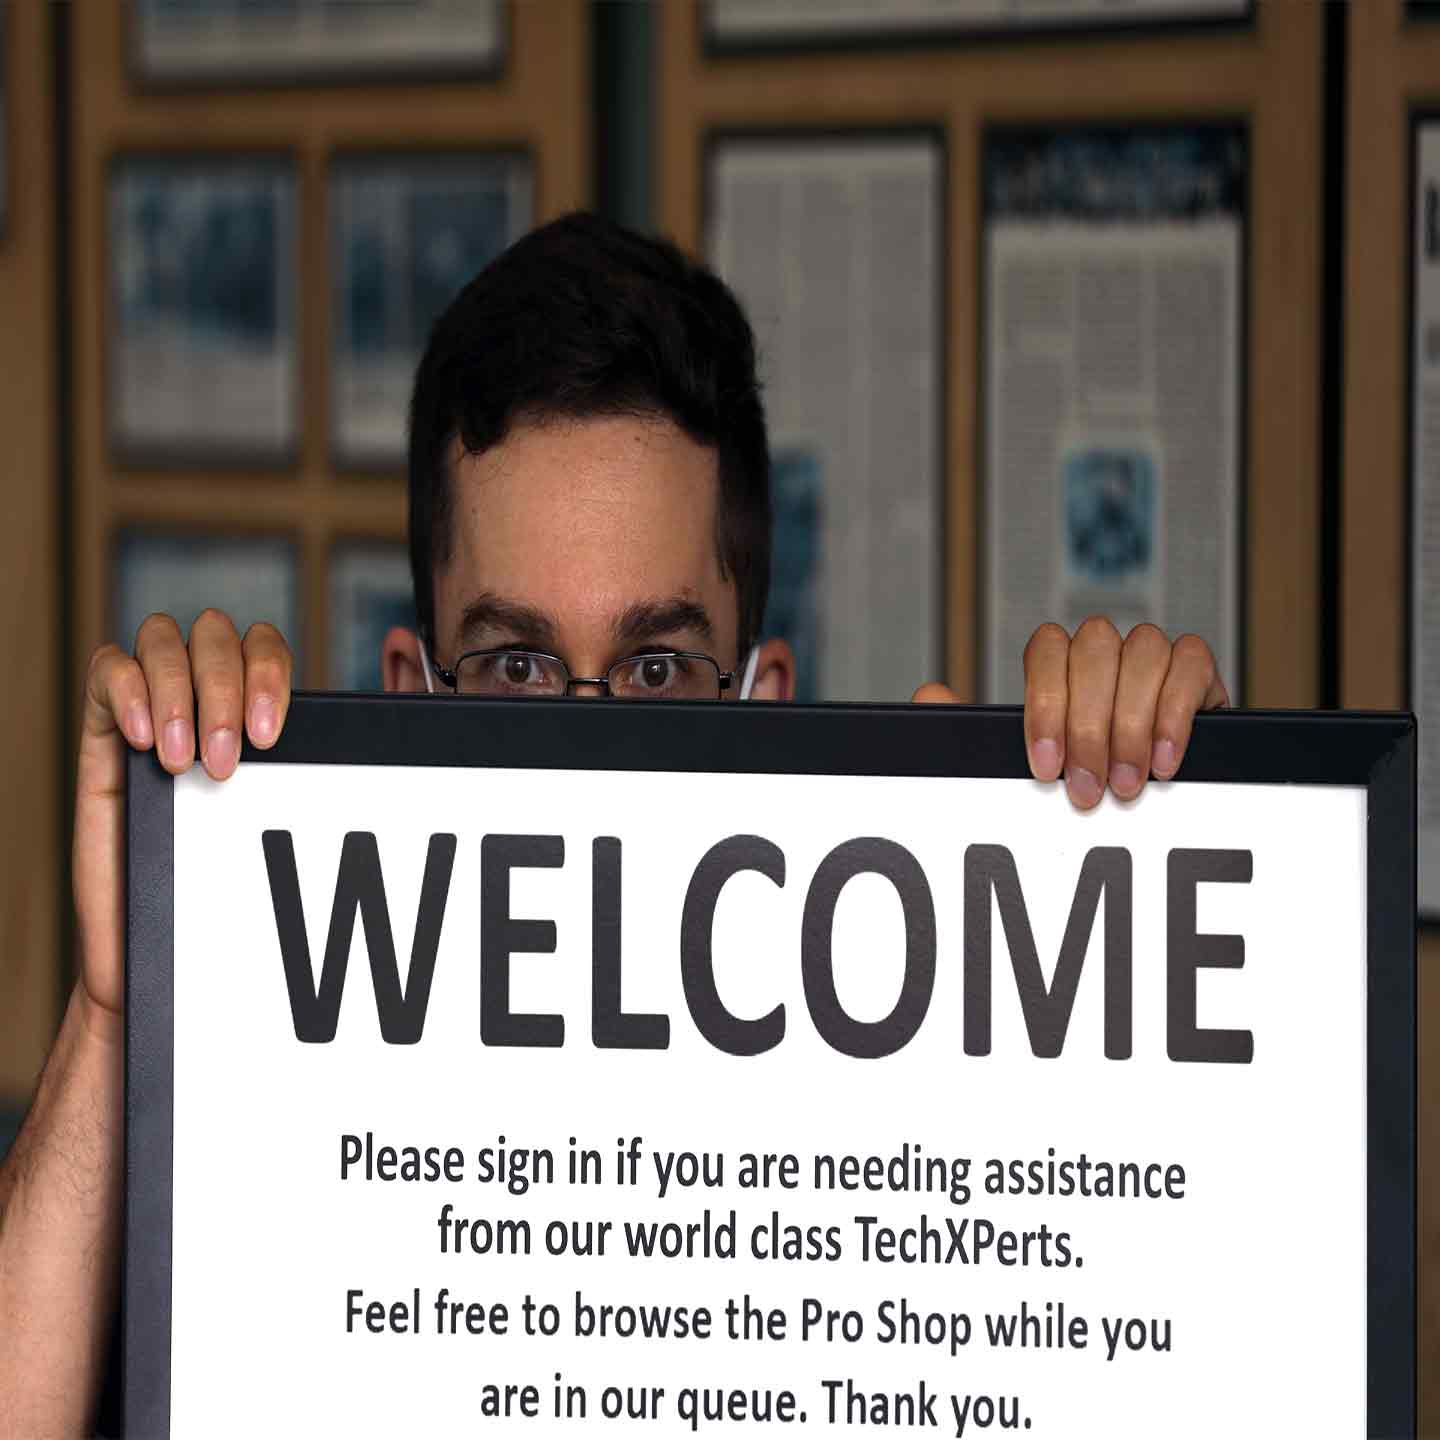 Man holding sign asking you to sign into the qminder Lancaster Archery Supply Pro Shop